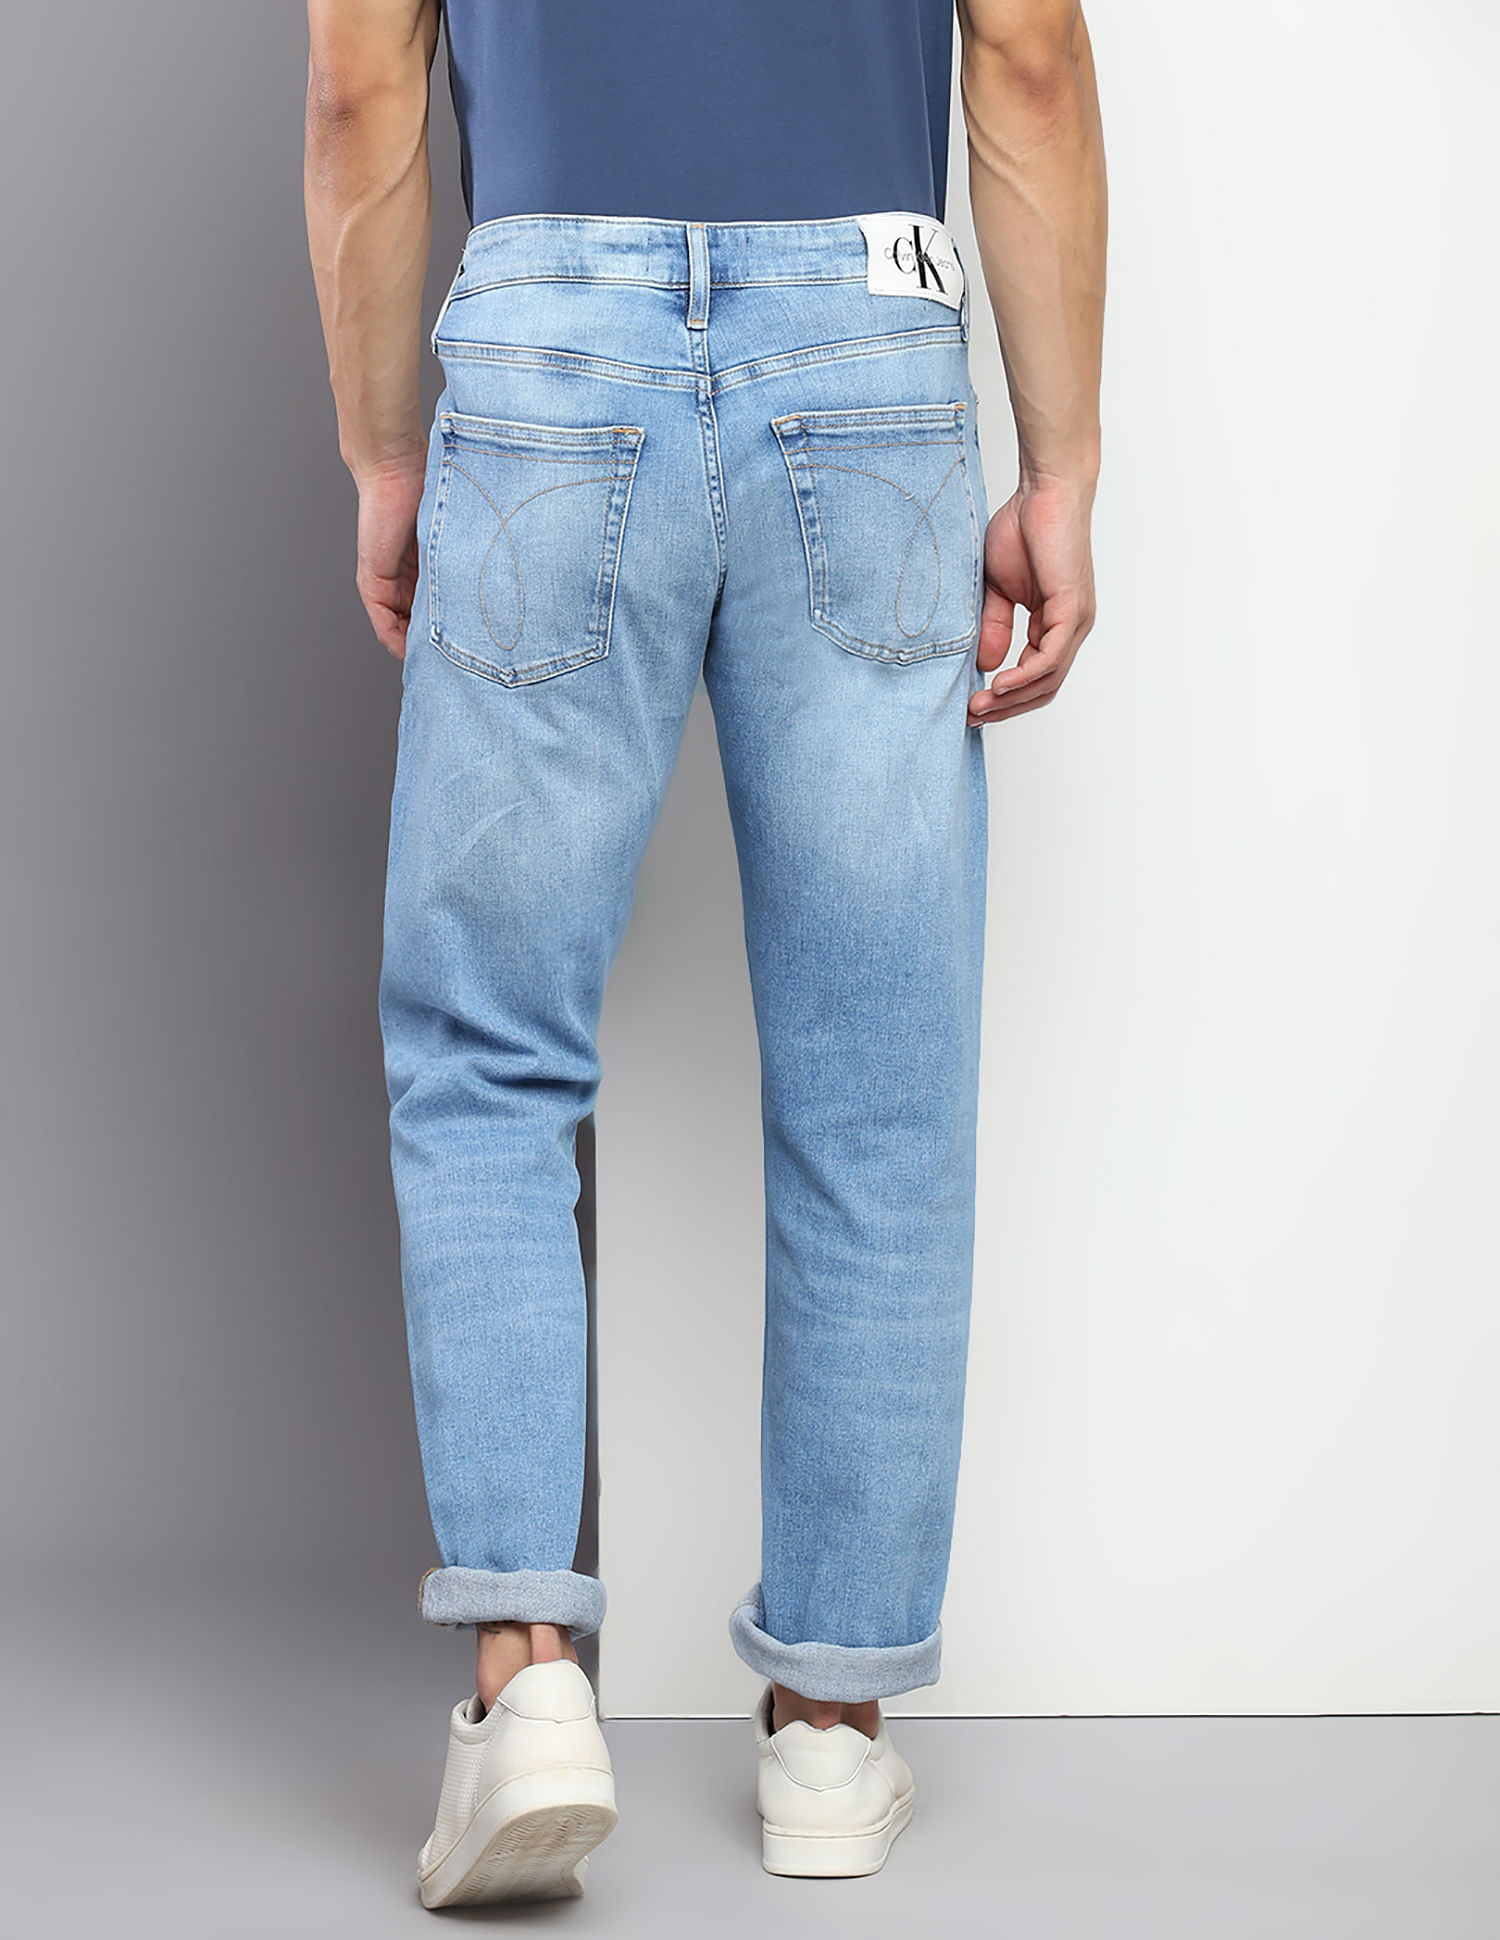 Buy Calvin Klein Jeans Recycled Cotton Stone Wash Slim Fit Jeans 